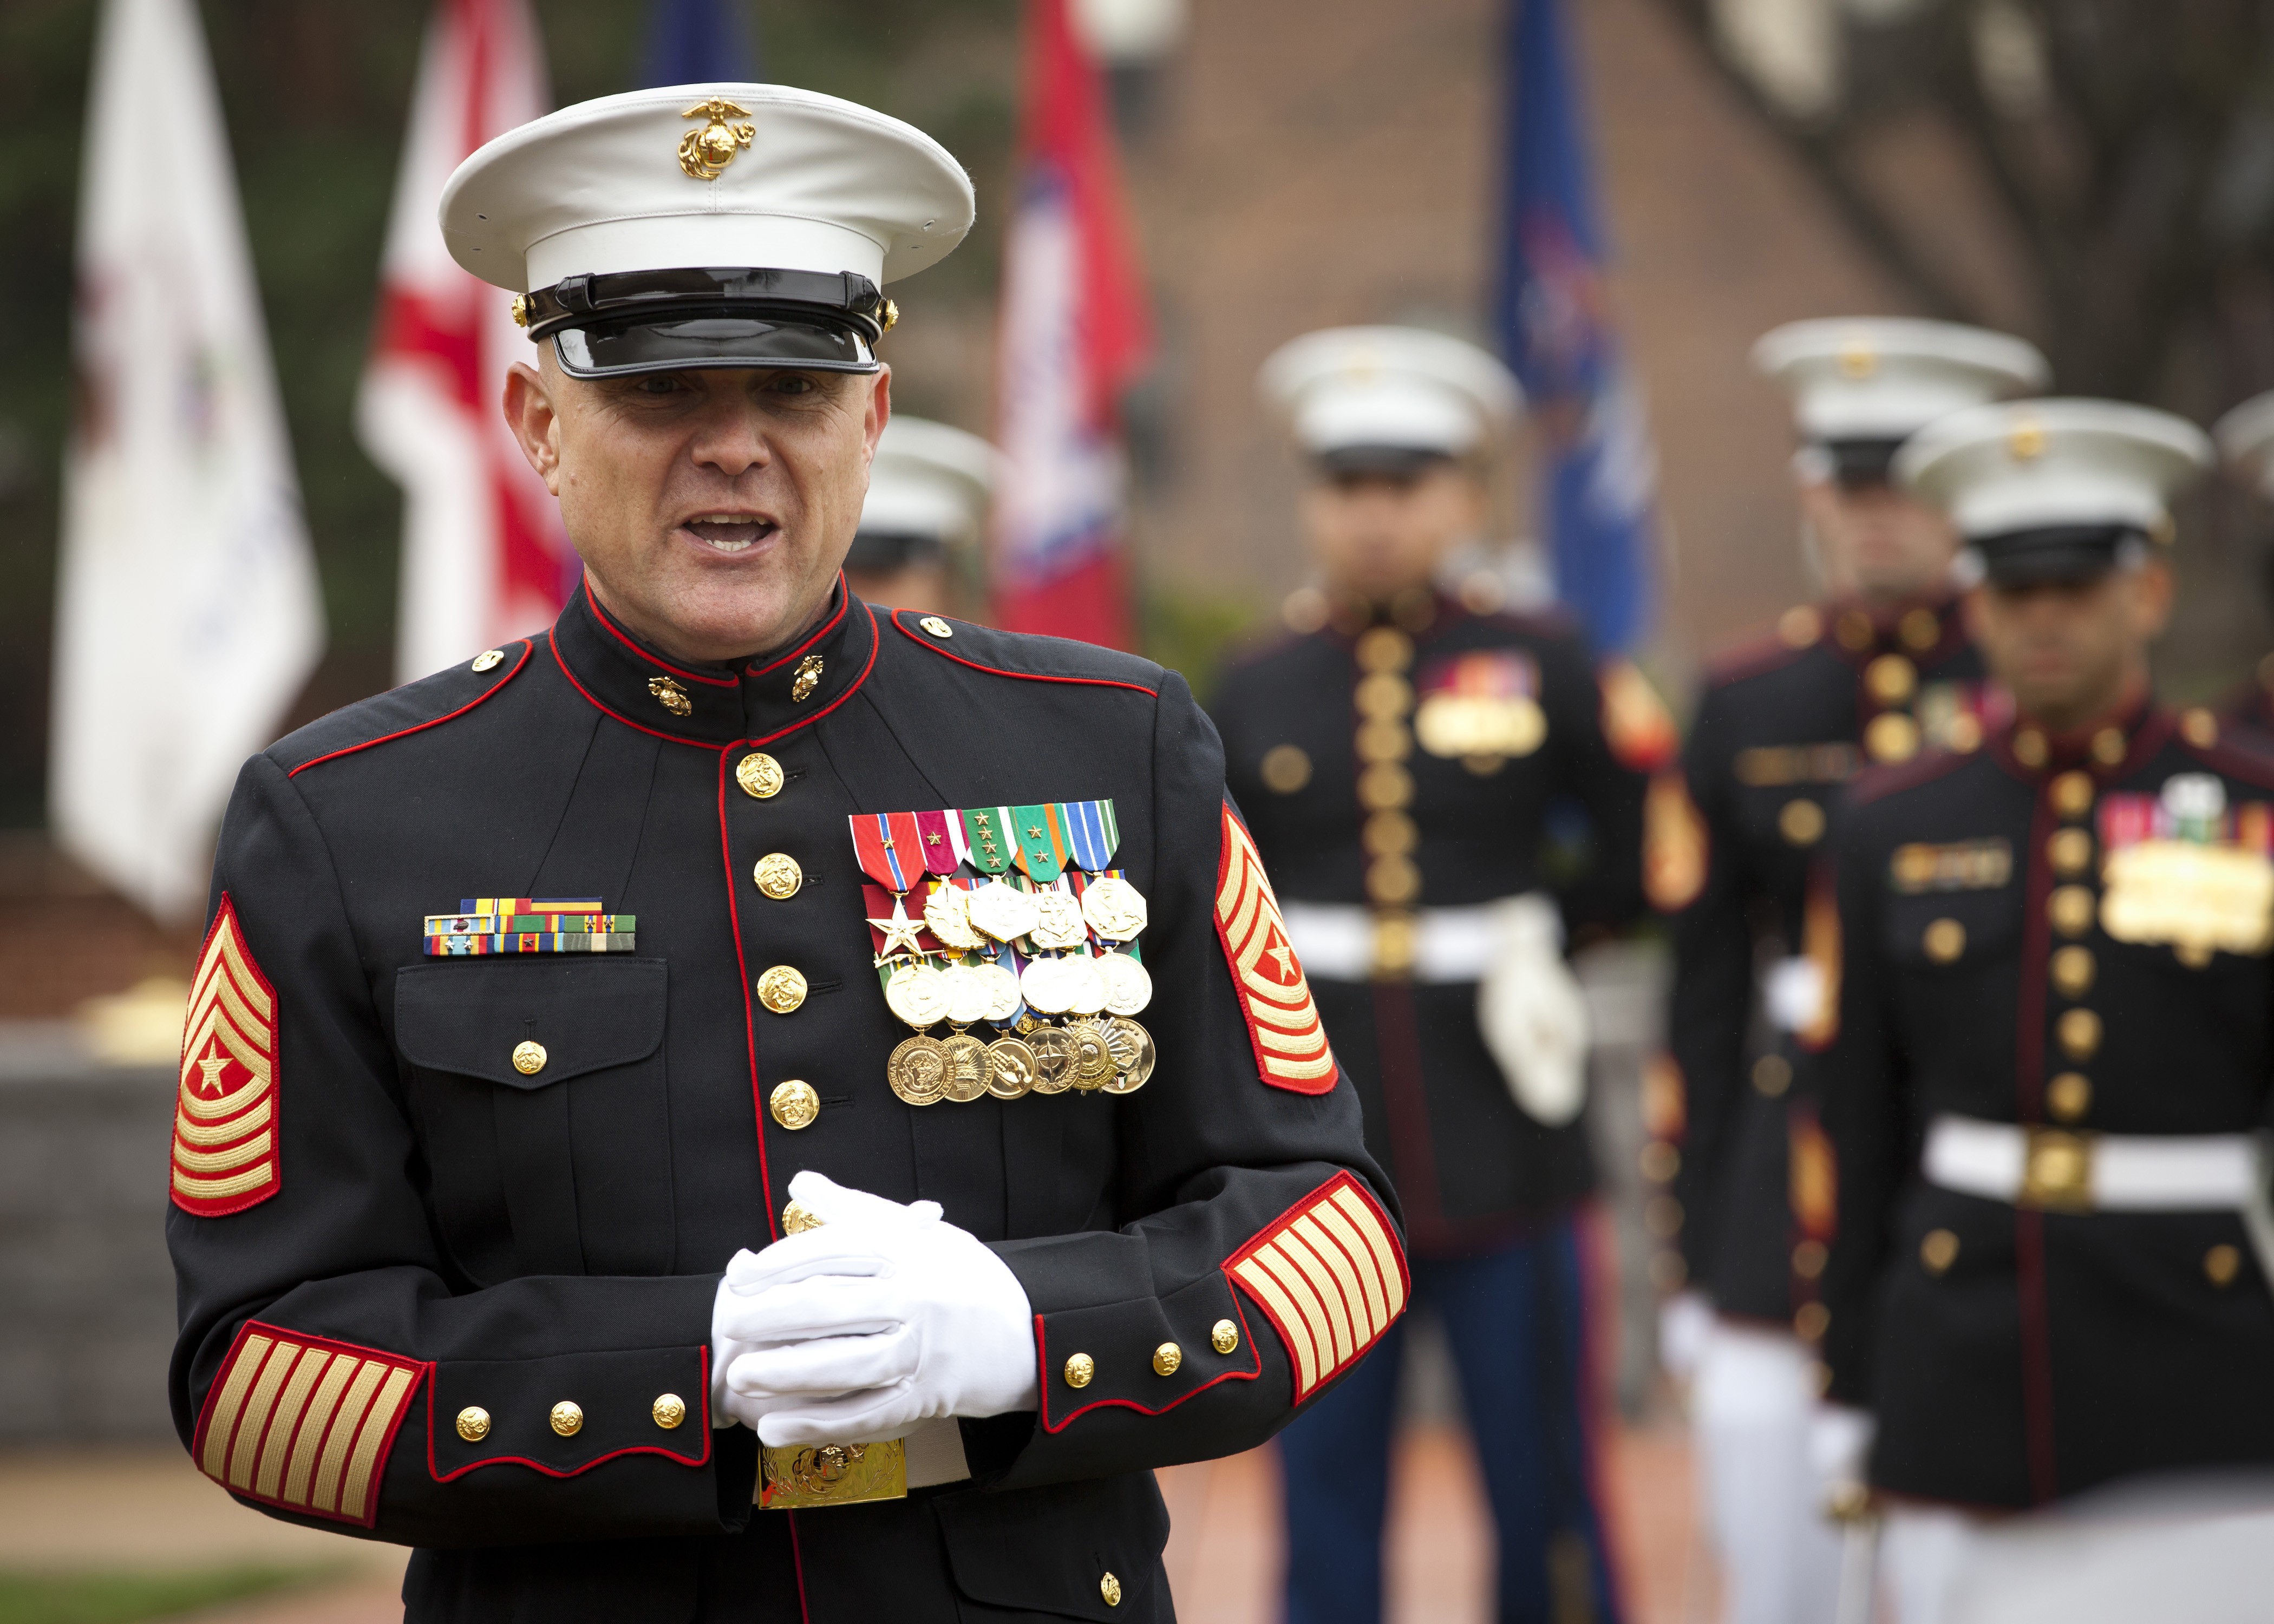 Meet the next sergeant major of the Marine Corps